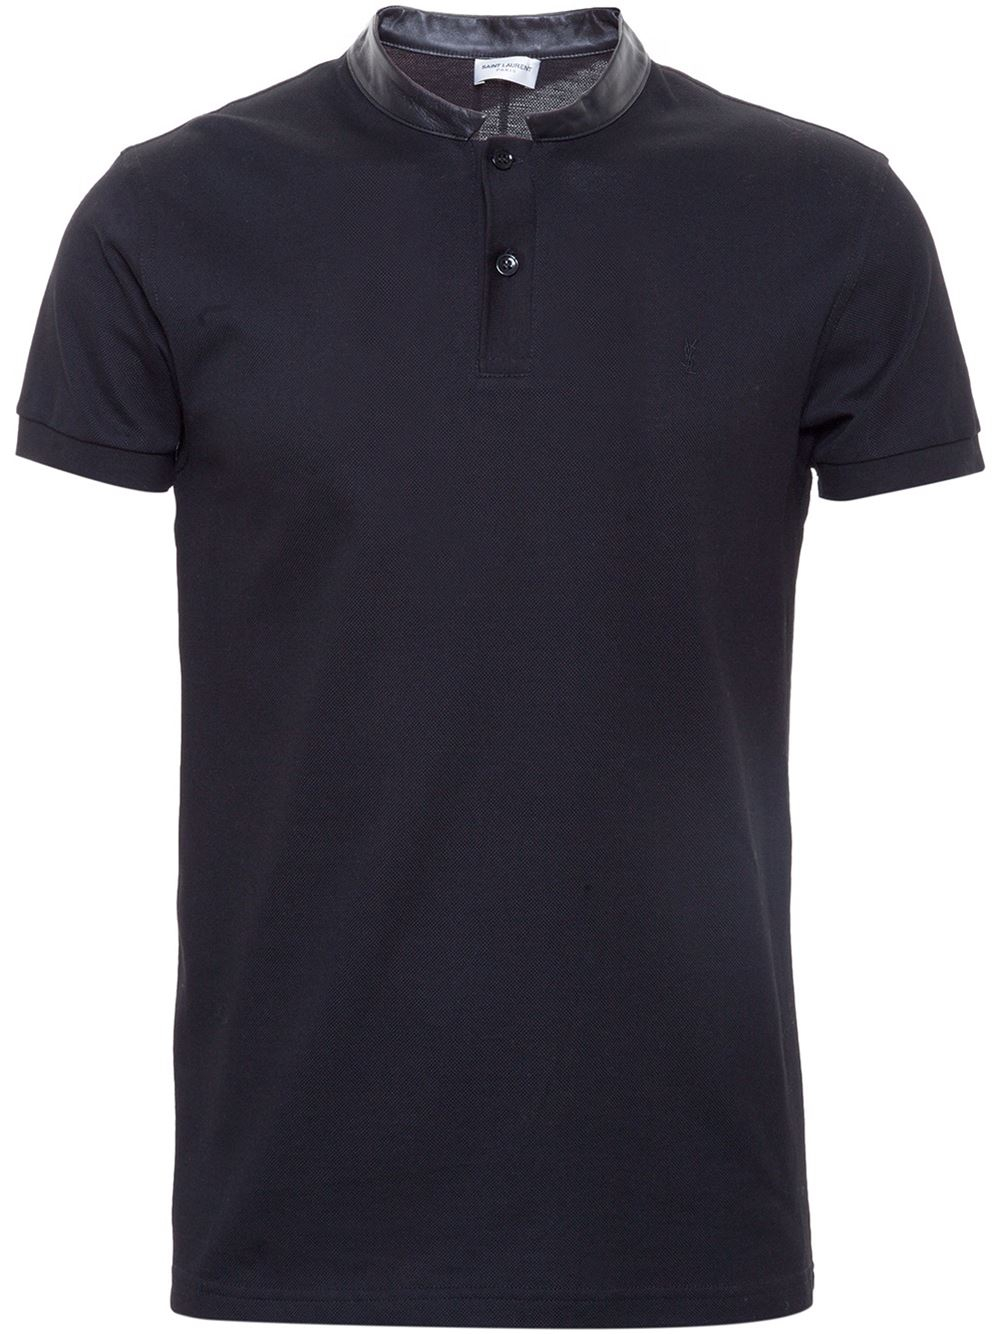 Saint Laurent Leather Band-Collar Polo Shirt in Black for Men - Lyst